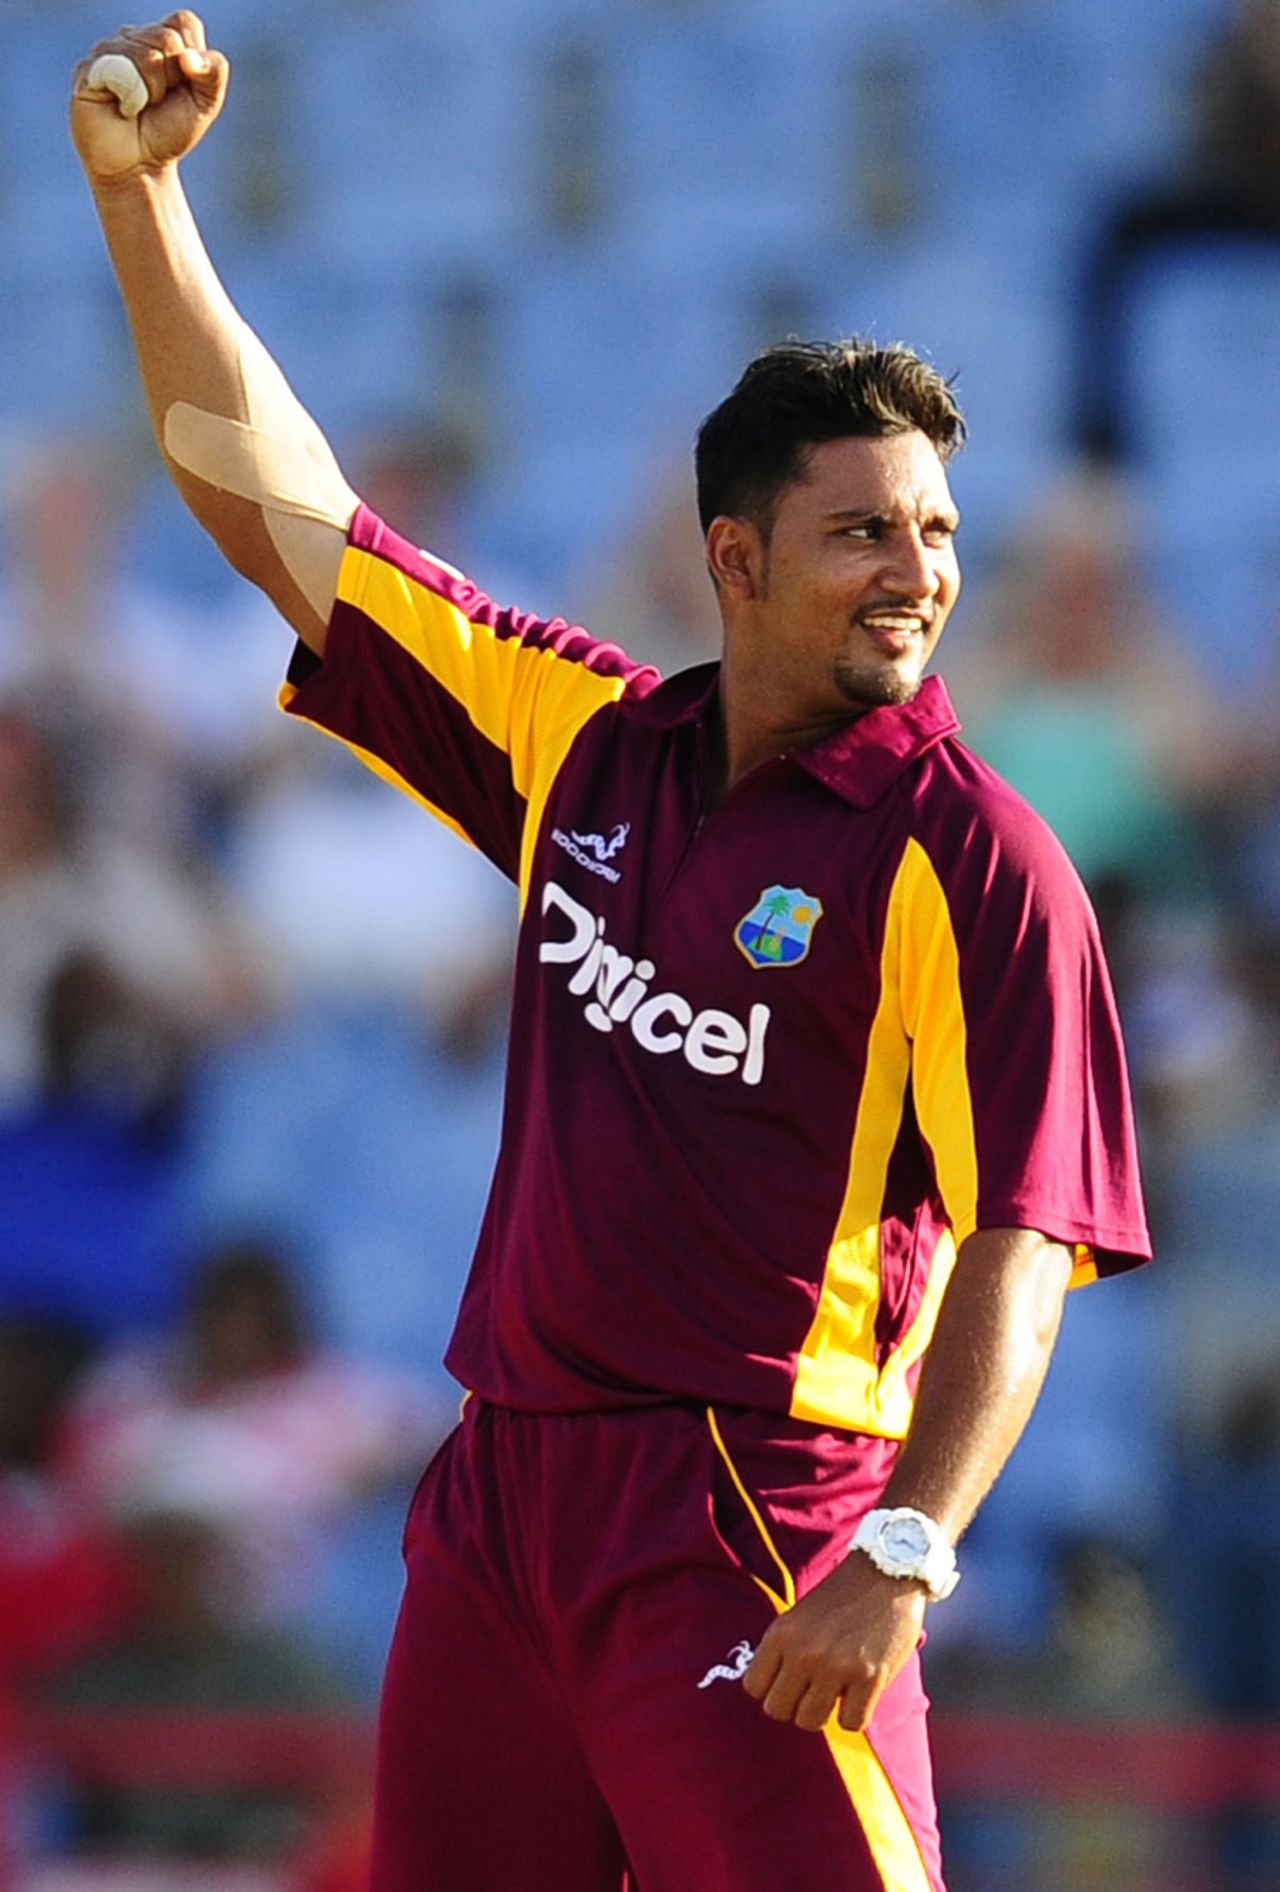 Ravi Rampaul was expensive but took three wickets as West Indies won by seven runs, West Indies v Pakistan, Only Twenty20, St Lucia, April 21, 2010
